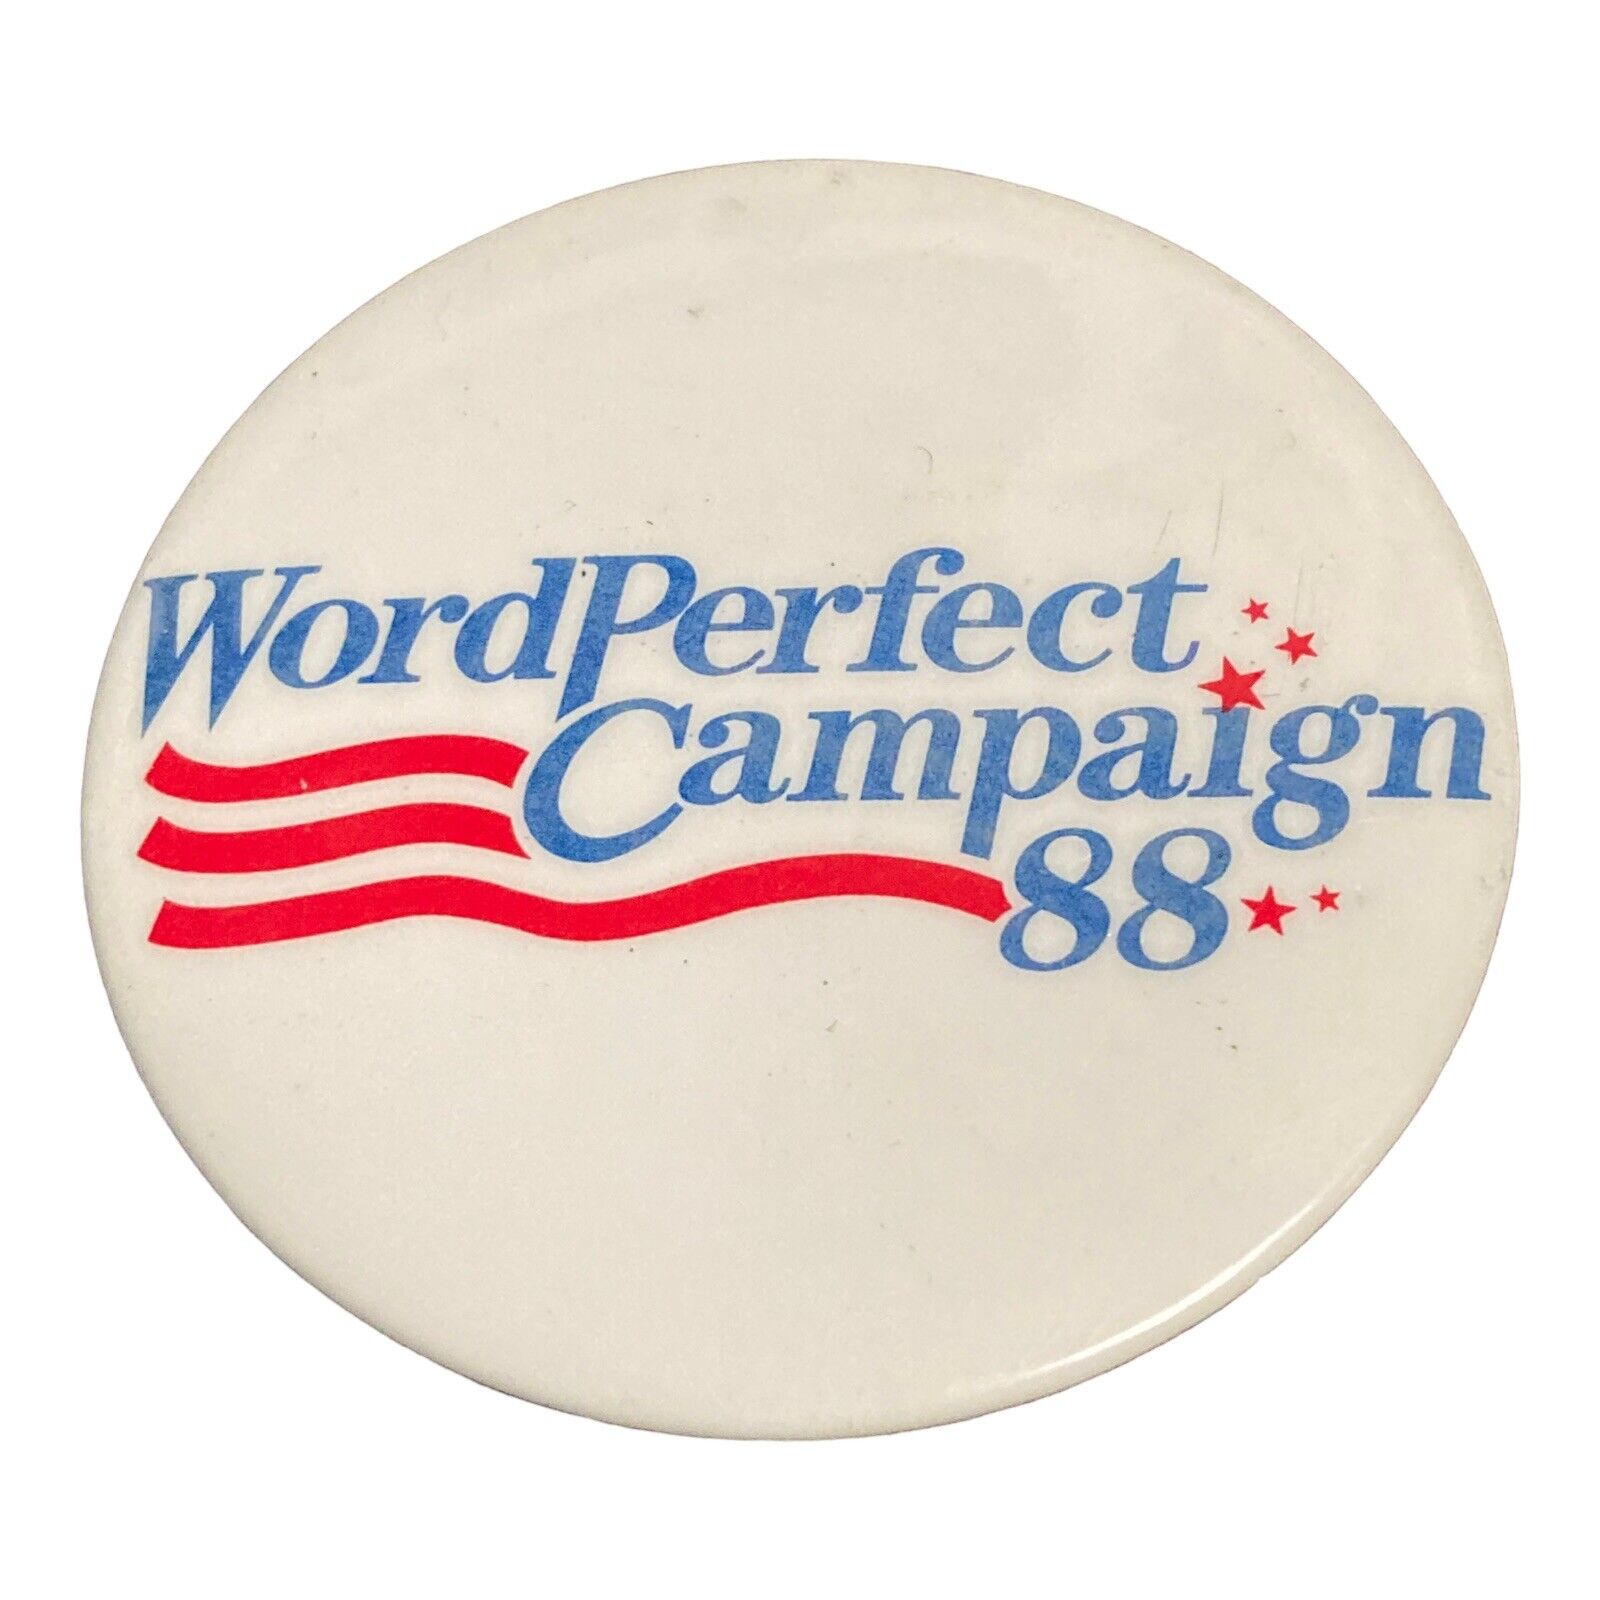 Microsoft WORD PERFECT 2.25” Pinback Button Election Campaign 88 Vintage 1988 